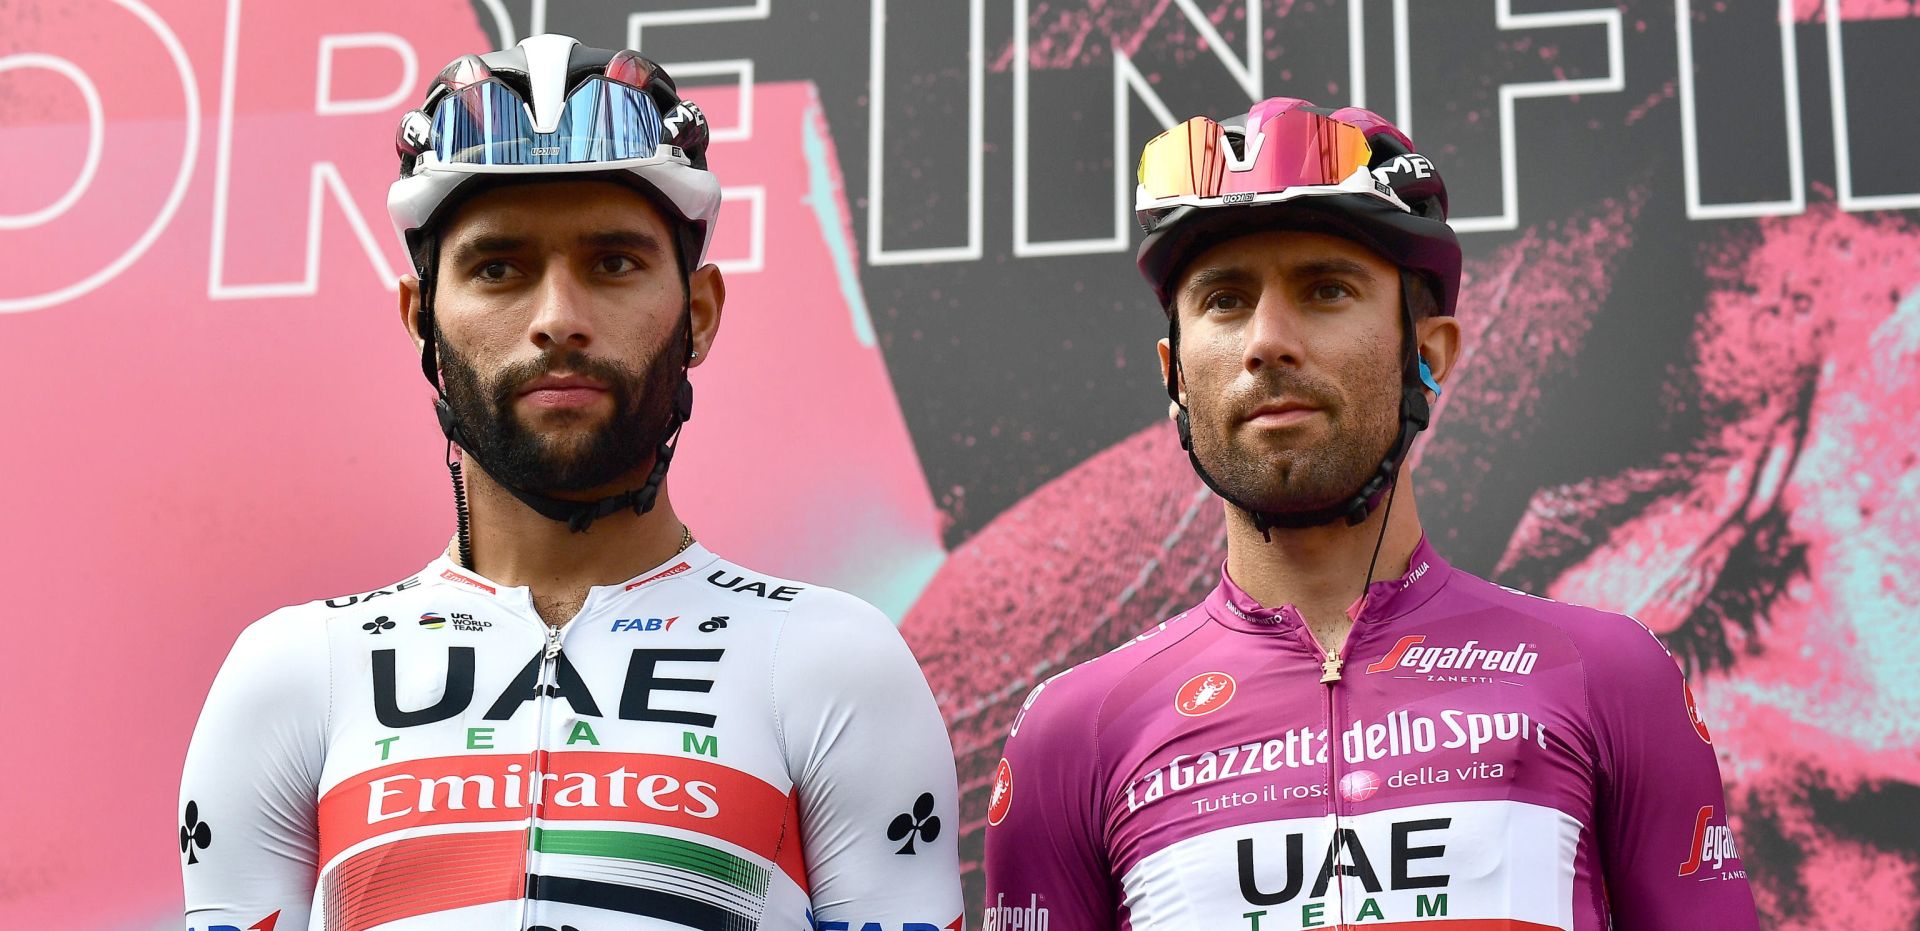 epa08724087 Italian rider Diego Ulissi (R) of UAE-Team Emirates in the points classification leader's cyclamen jersey and his Colombian team mate Fernando Gaviria attend the sign in ceremony before the 4th stage of the 2020 Giro d'Italia cycling race over 140 km from Catania to Villafranca Tirrena in Sicily, Italy, 06 October 2020.  EPA/LUCA ZENNARO